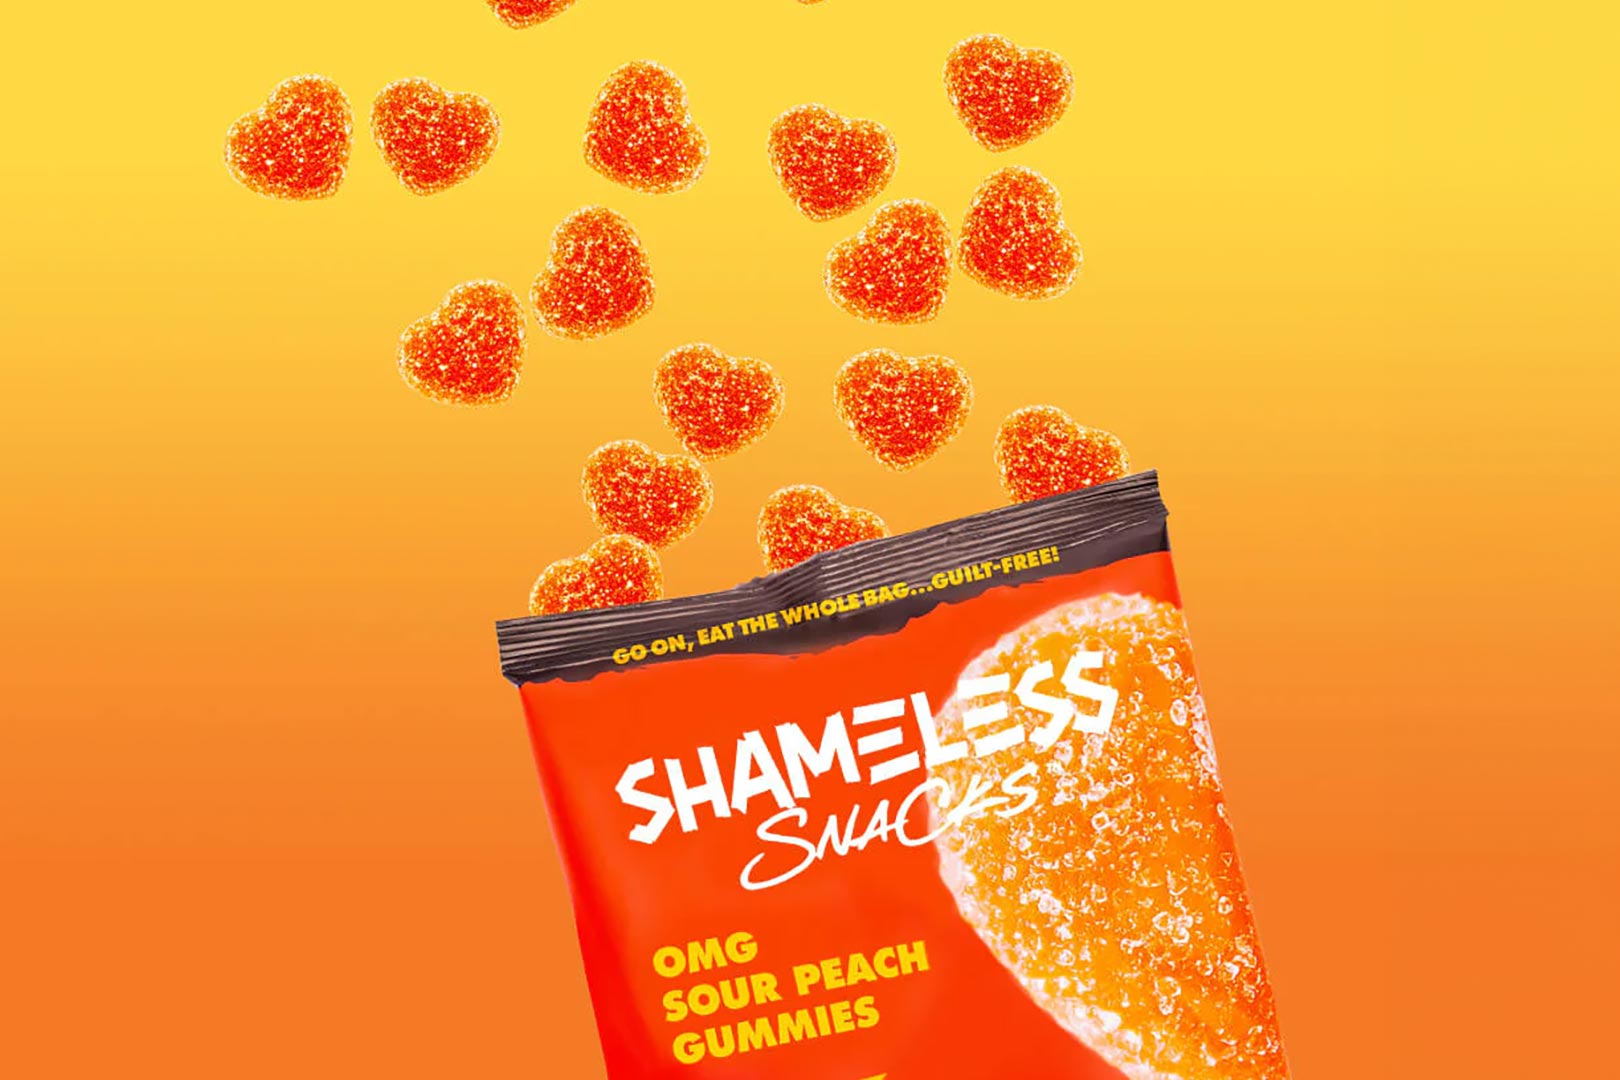 Introducing Shameless Snacks and its low-calorie gummy candy